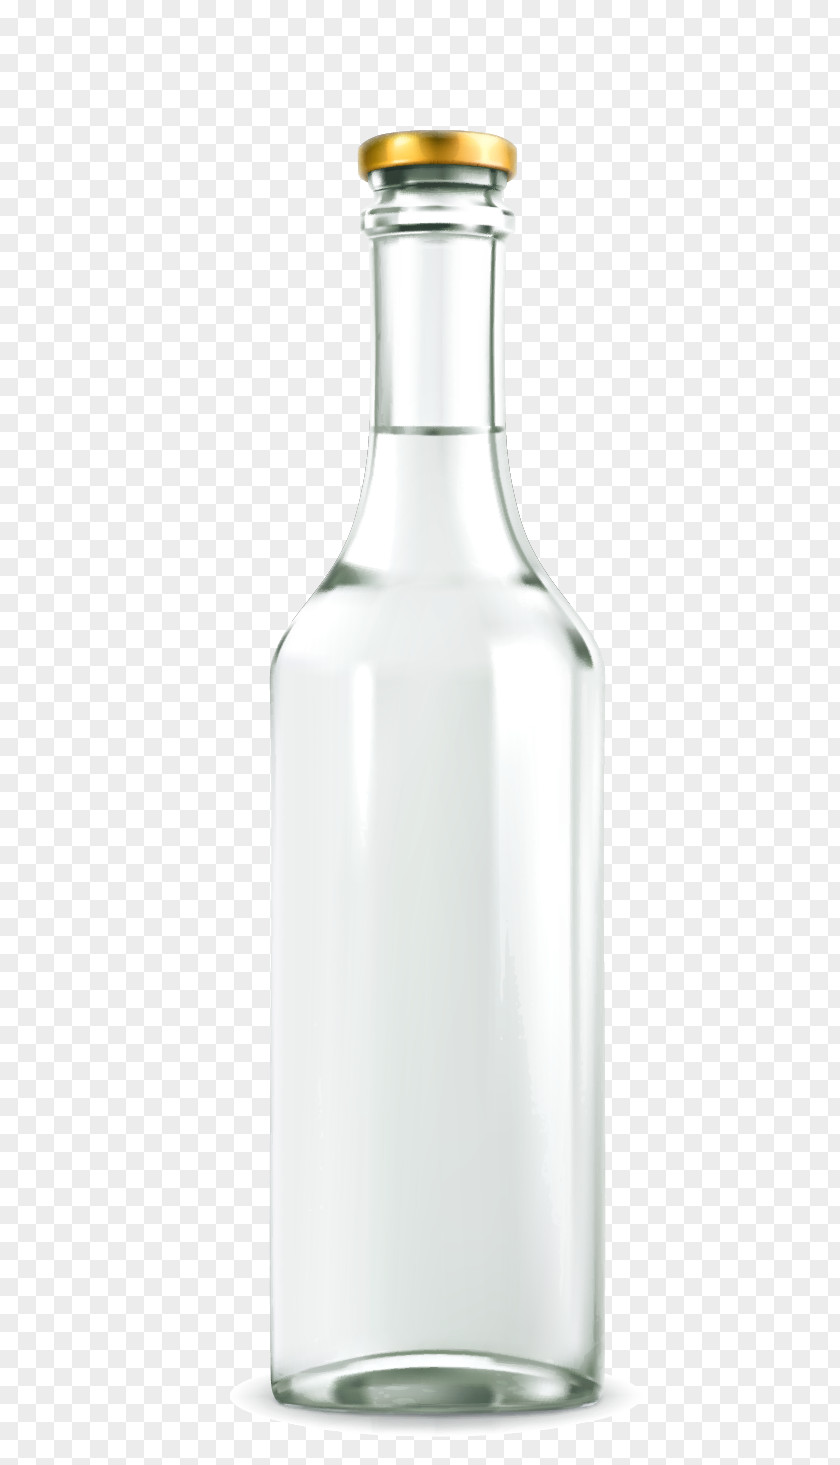 Textured Glass Vector Material Bottle Drink PNG